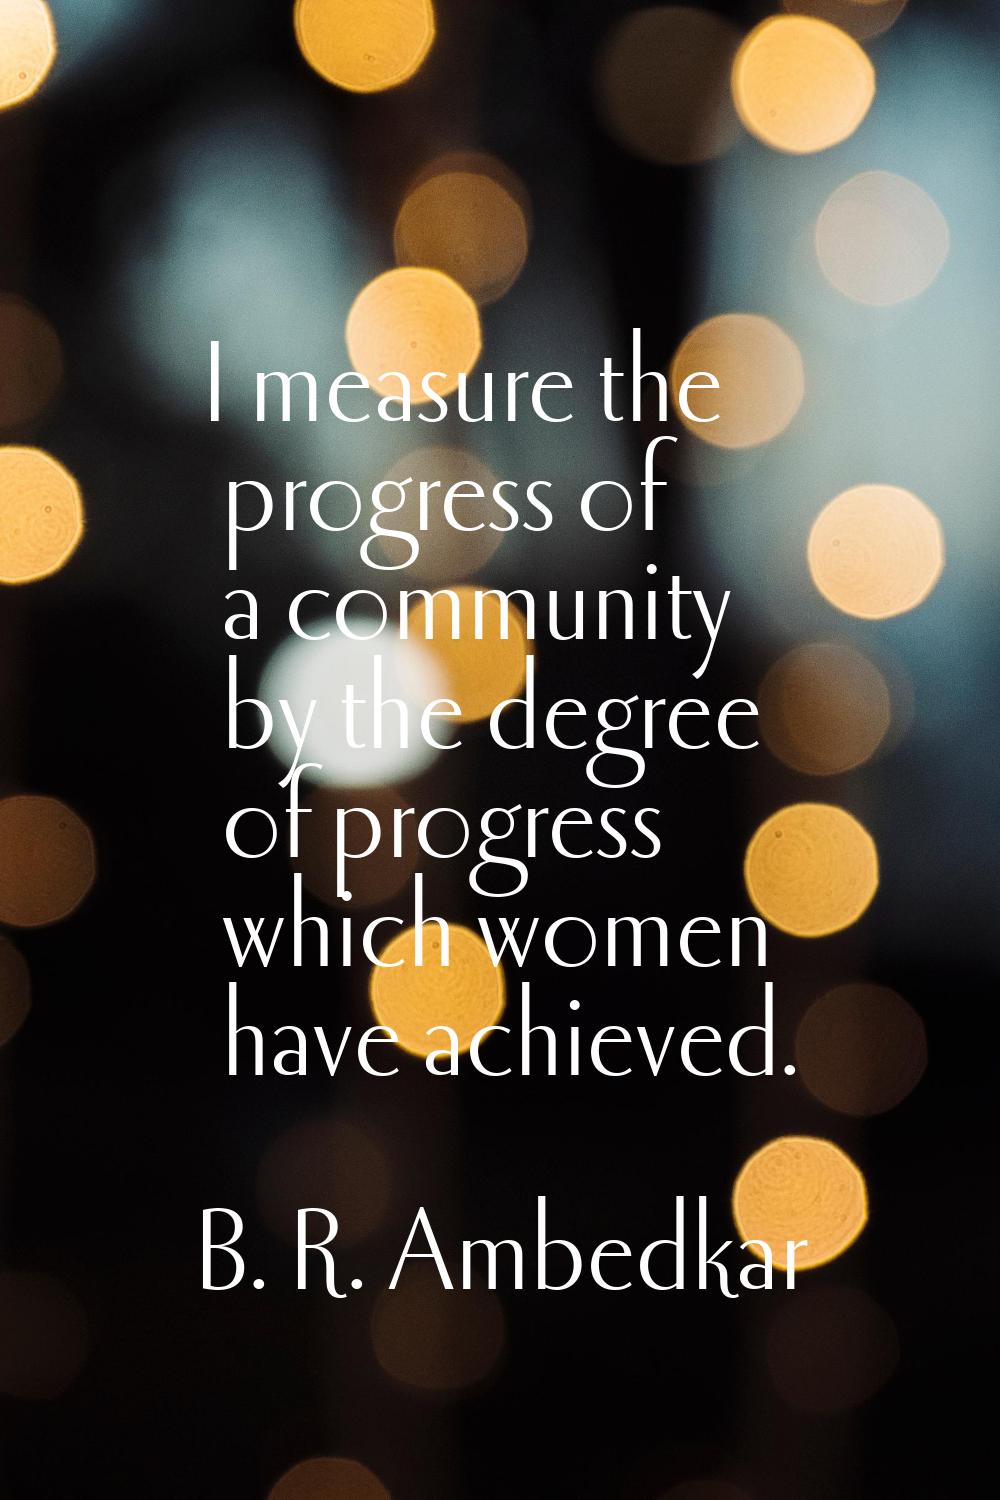 I measure the progress of a community by the degree of progress which women have achieved.